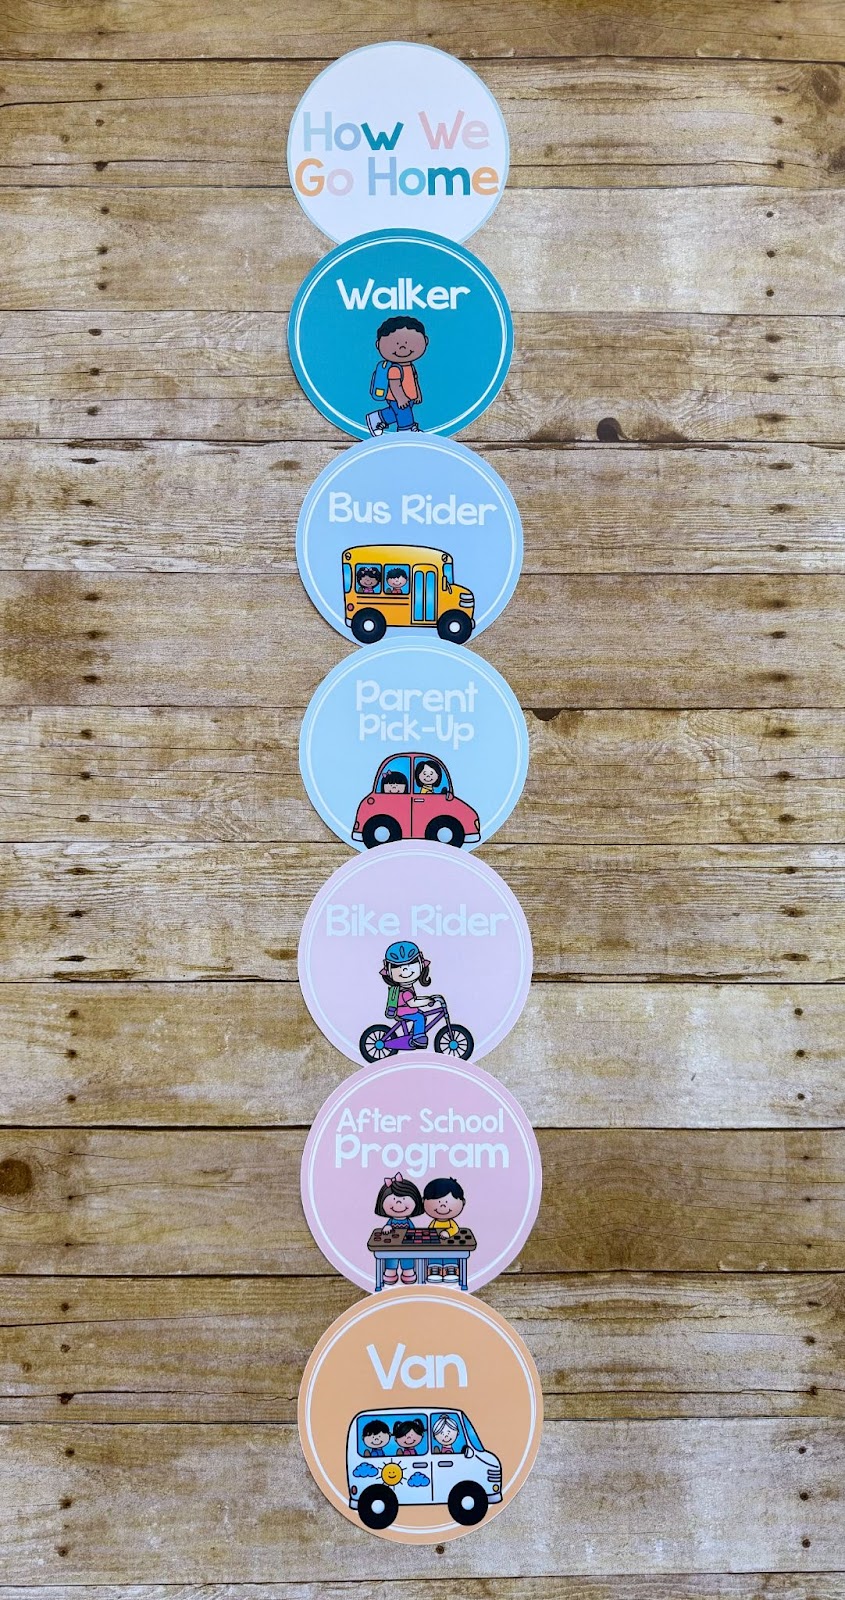 This image shows a picture with 7 different circles.  One circle reads "How we go home" and the others each show a different transportation method. Some of the methods say "Parent Pick-Up", "Bike Rider", and "Bus Rider". 